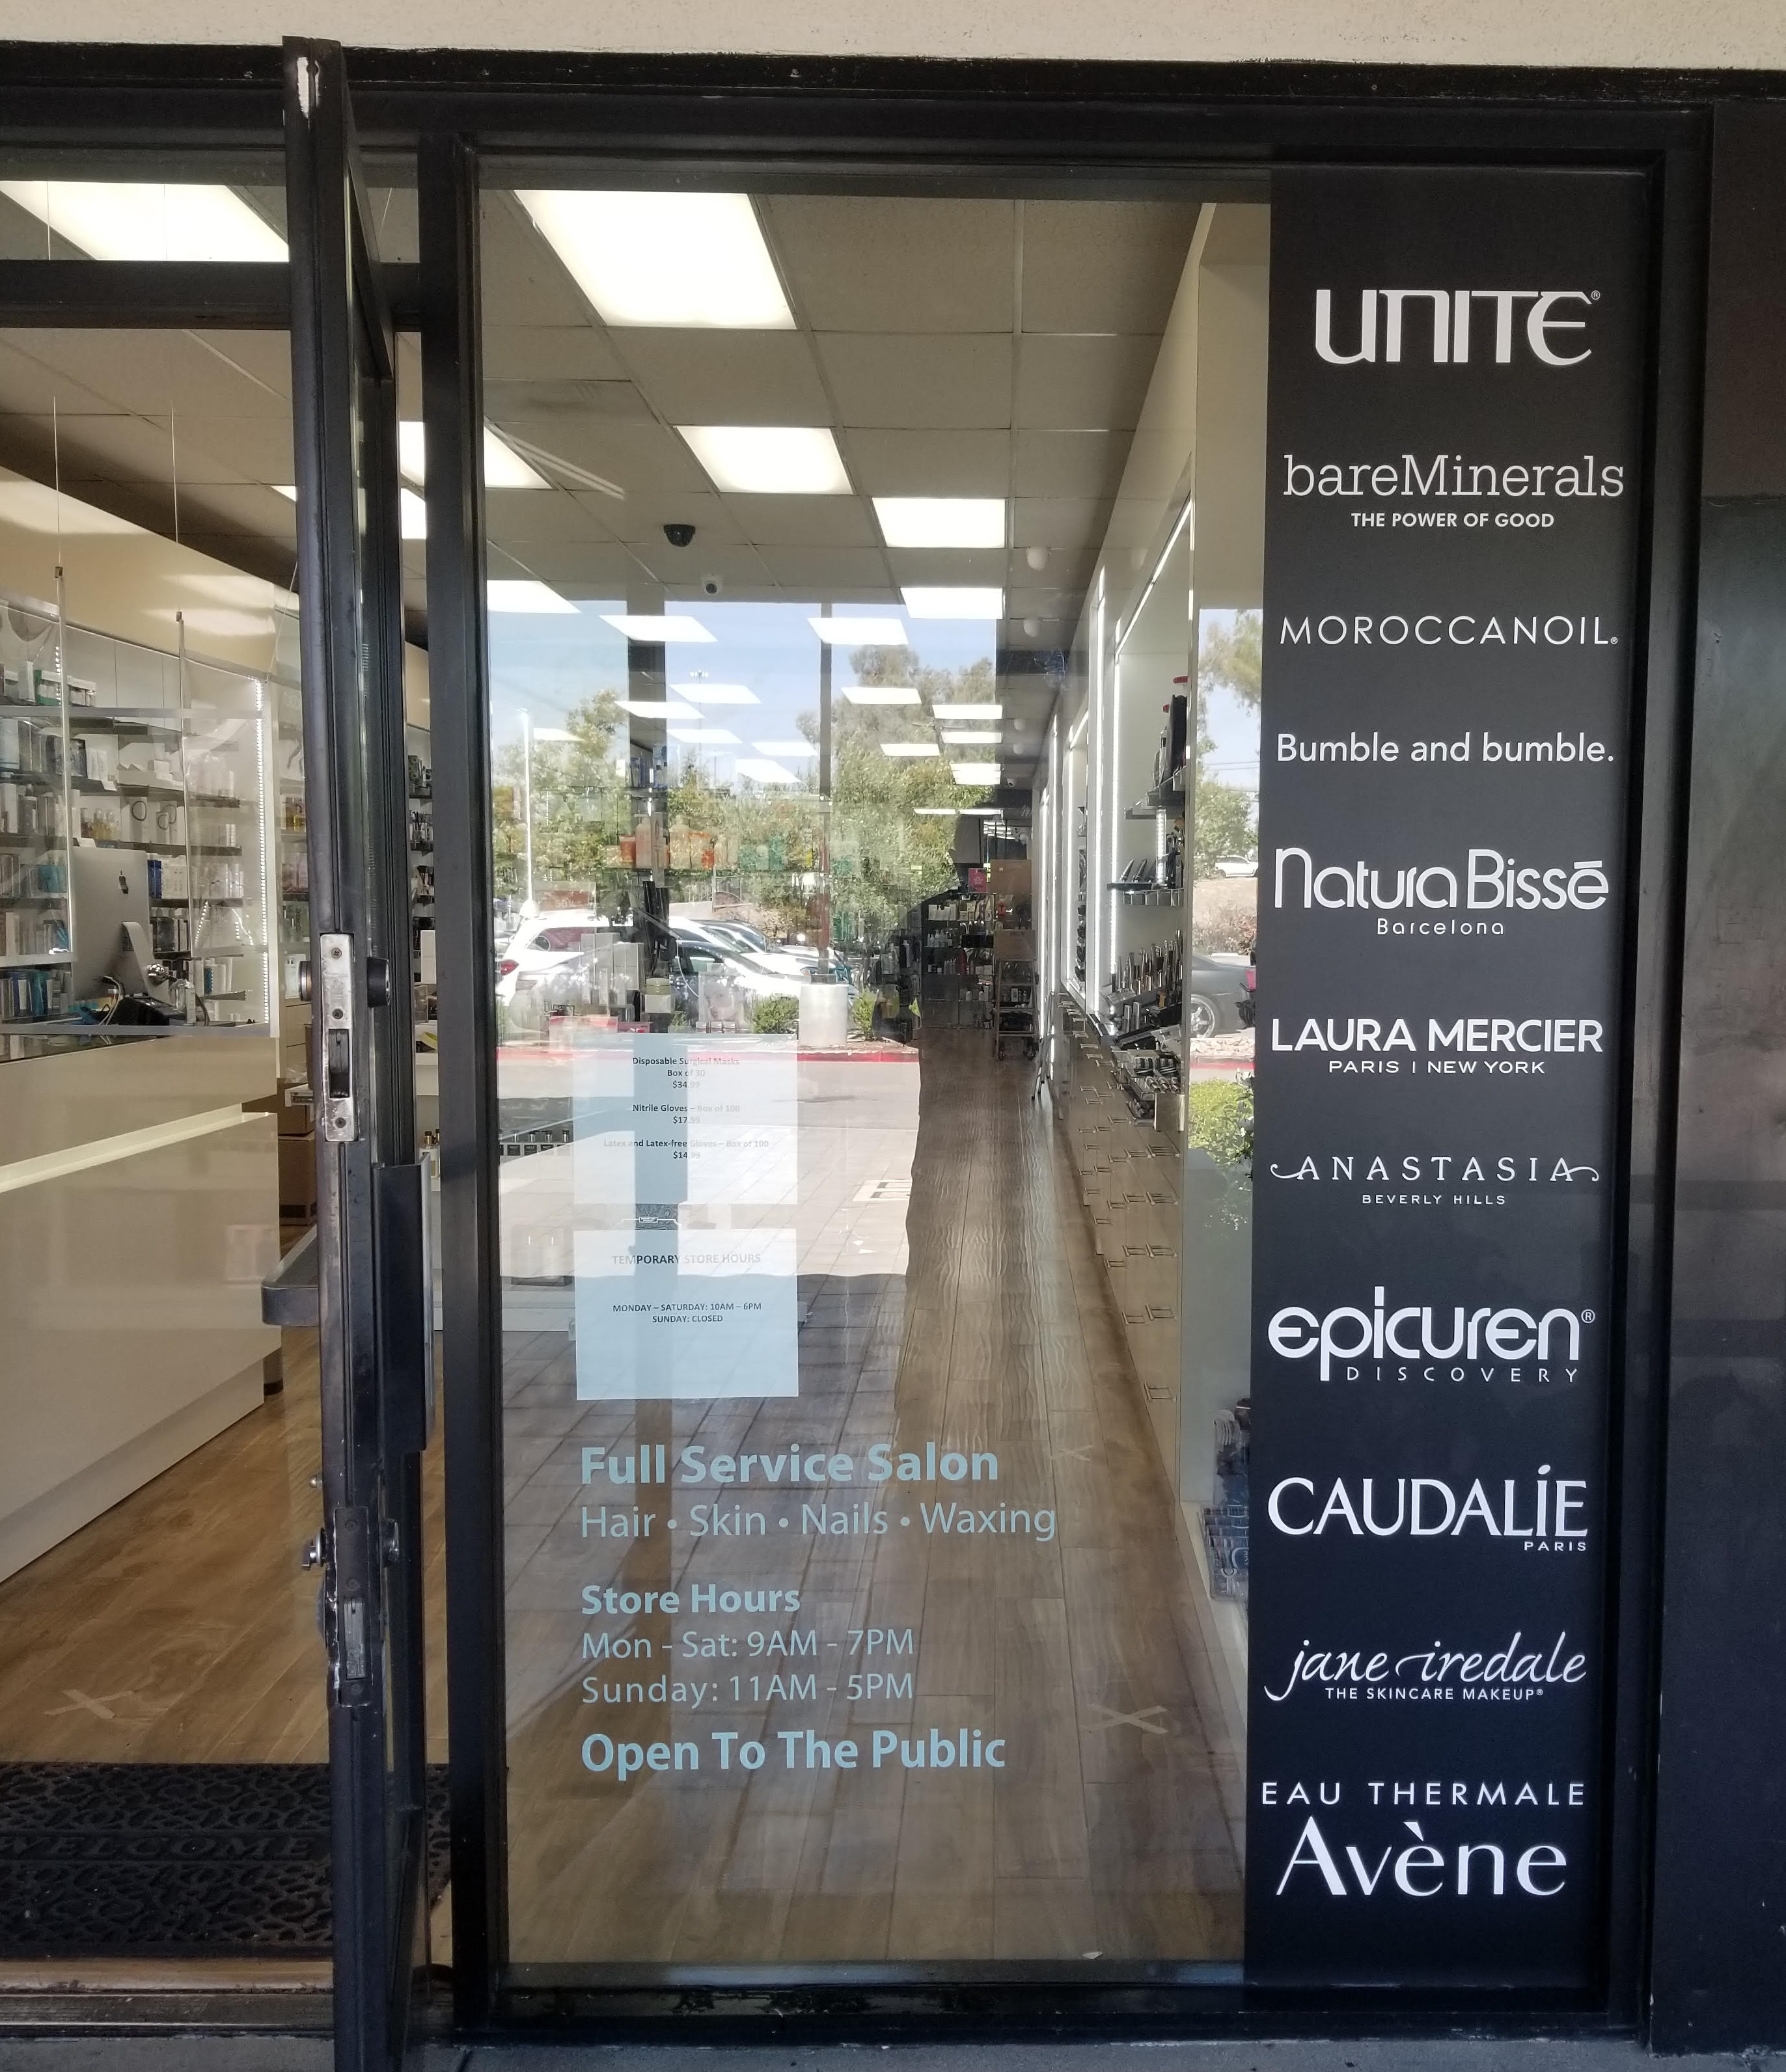 We created salon window graphics for Pro Beauty. So the Woodland Hills beauty center can advertise services while providing privacy to their clientele.